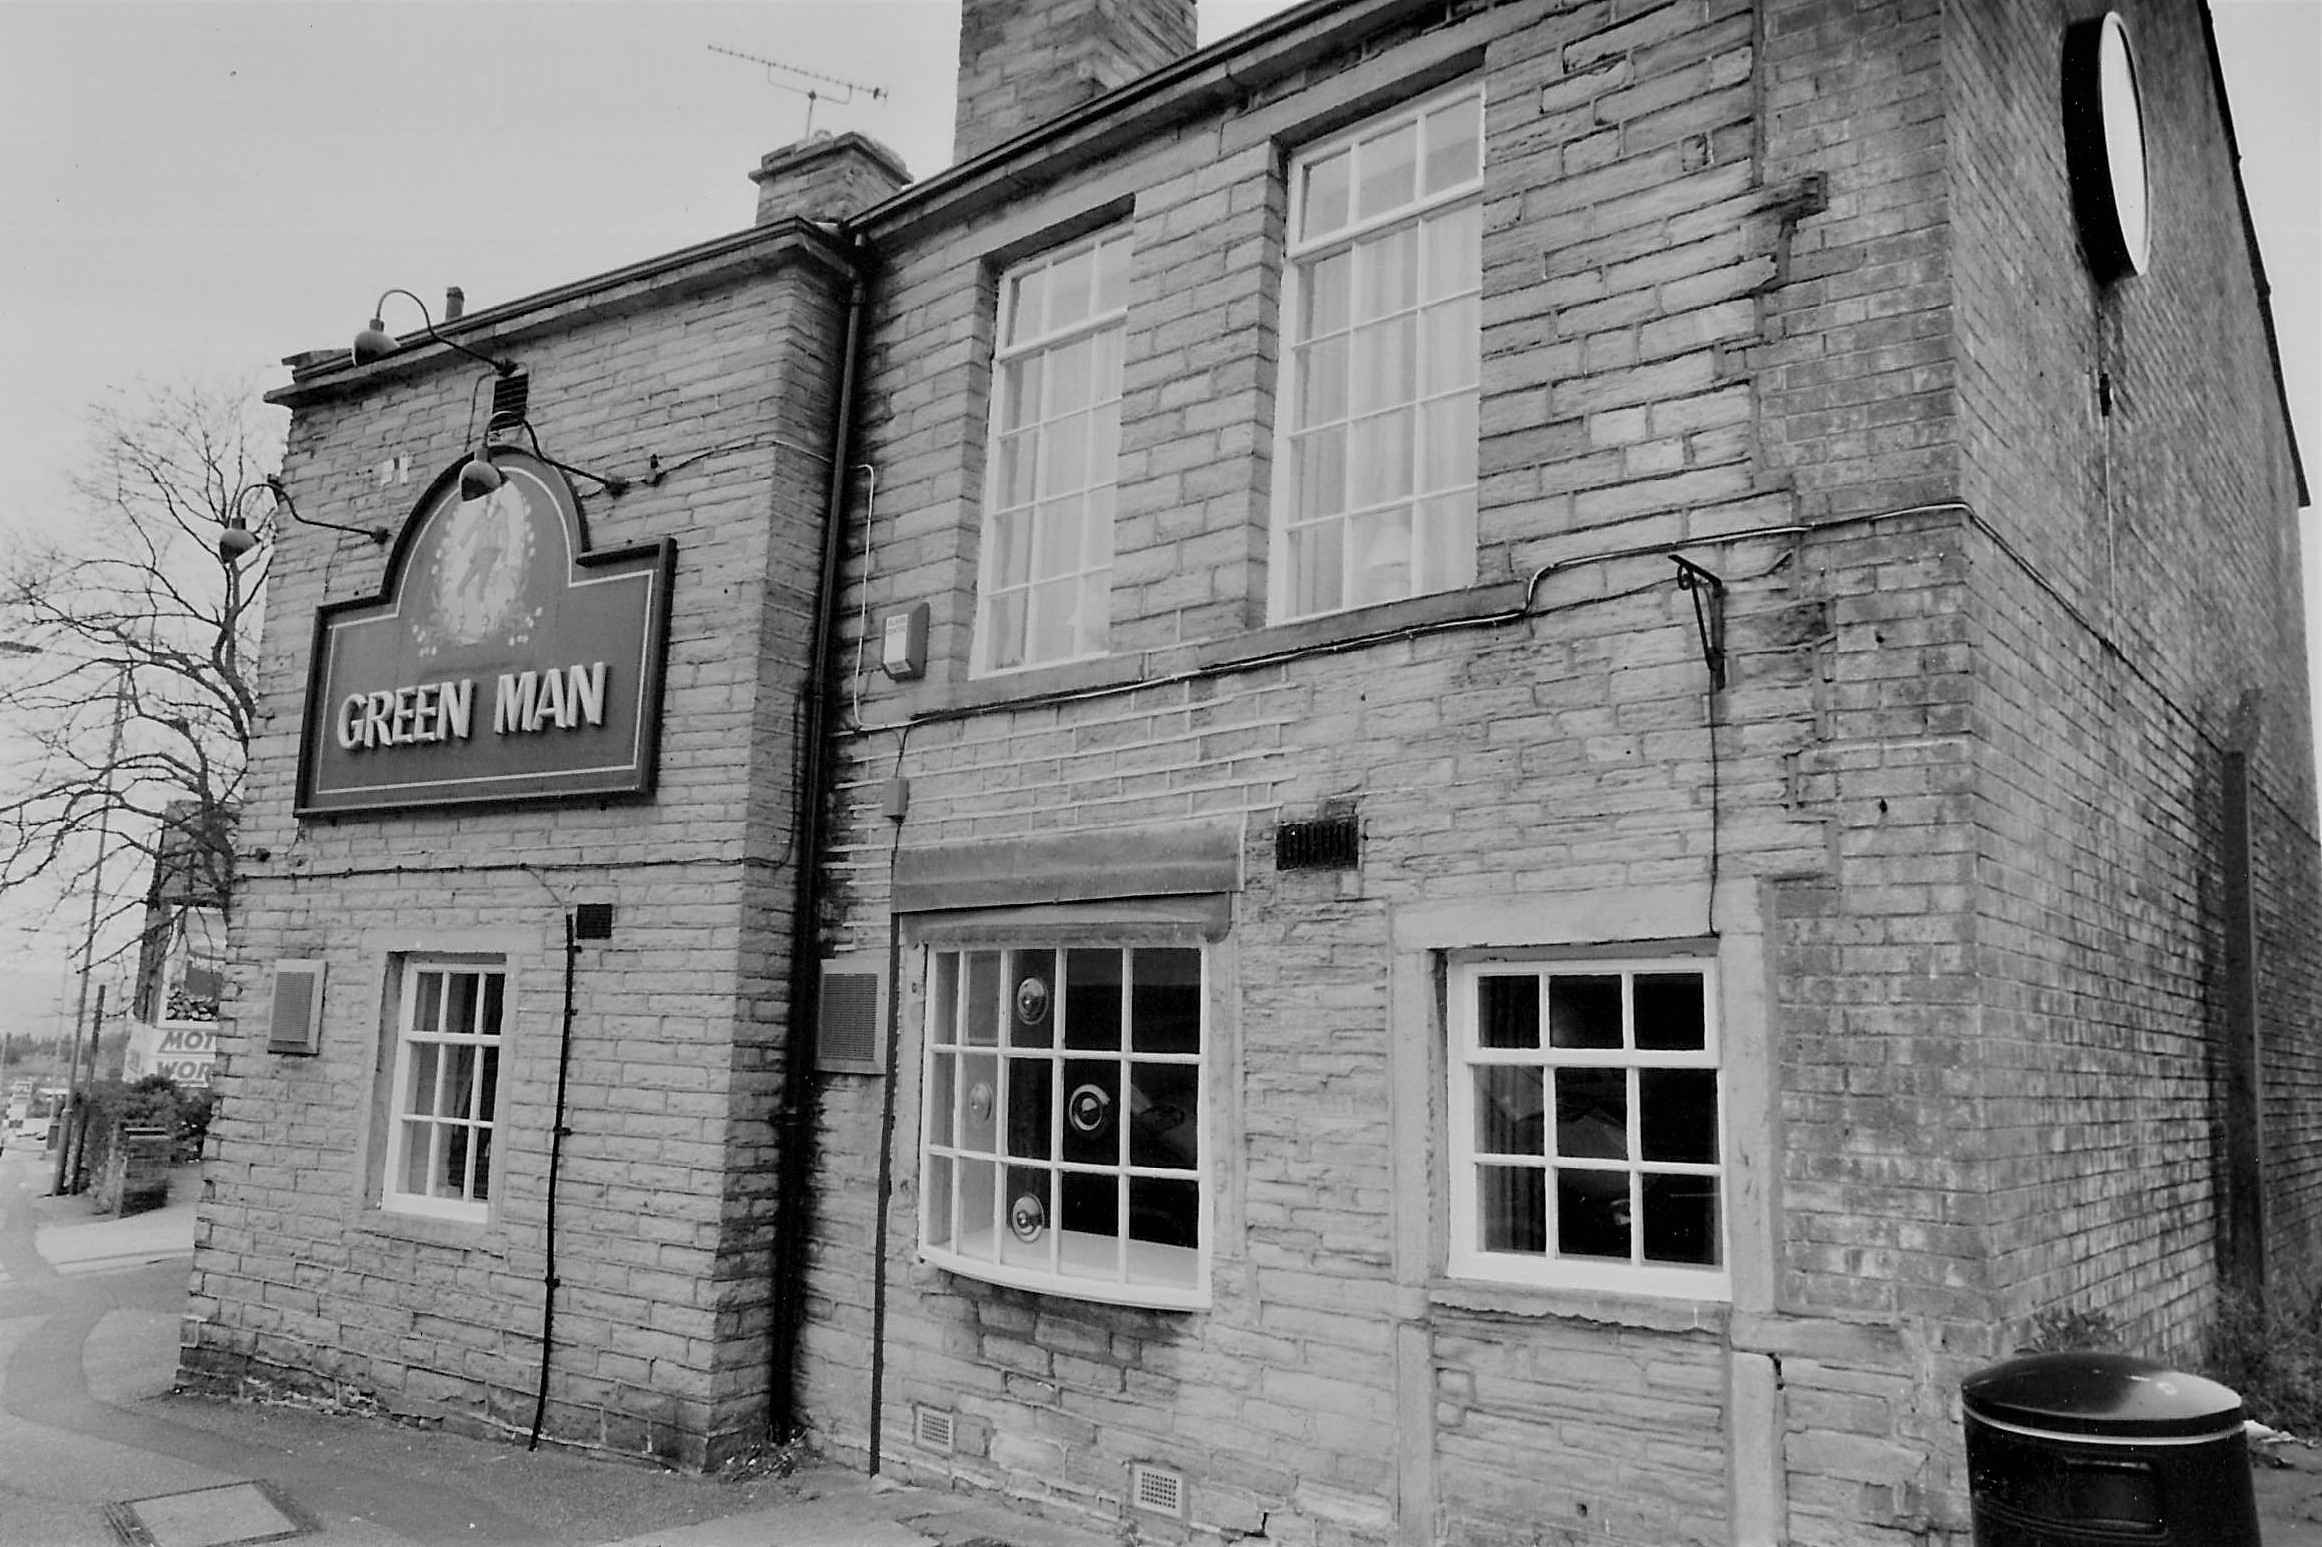 Colourful past of the Green Man pub